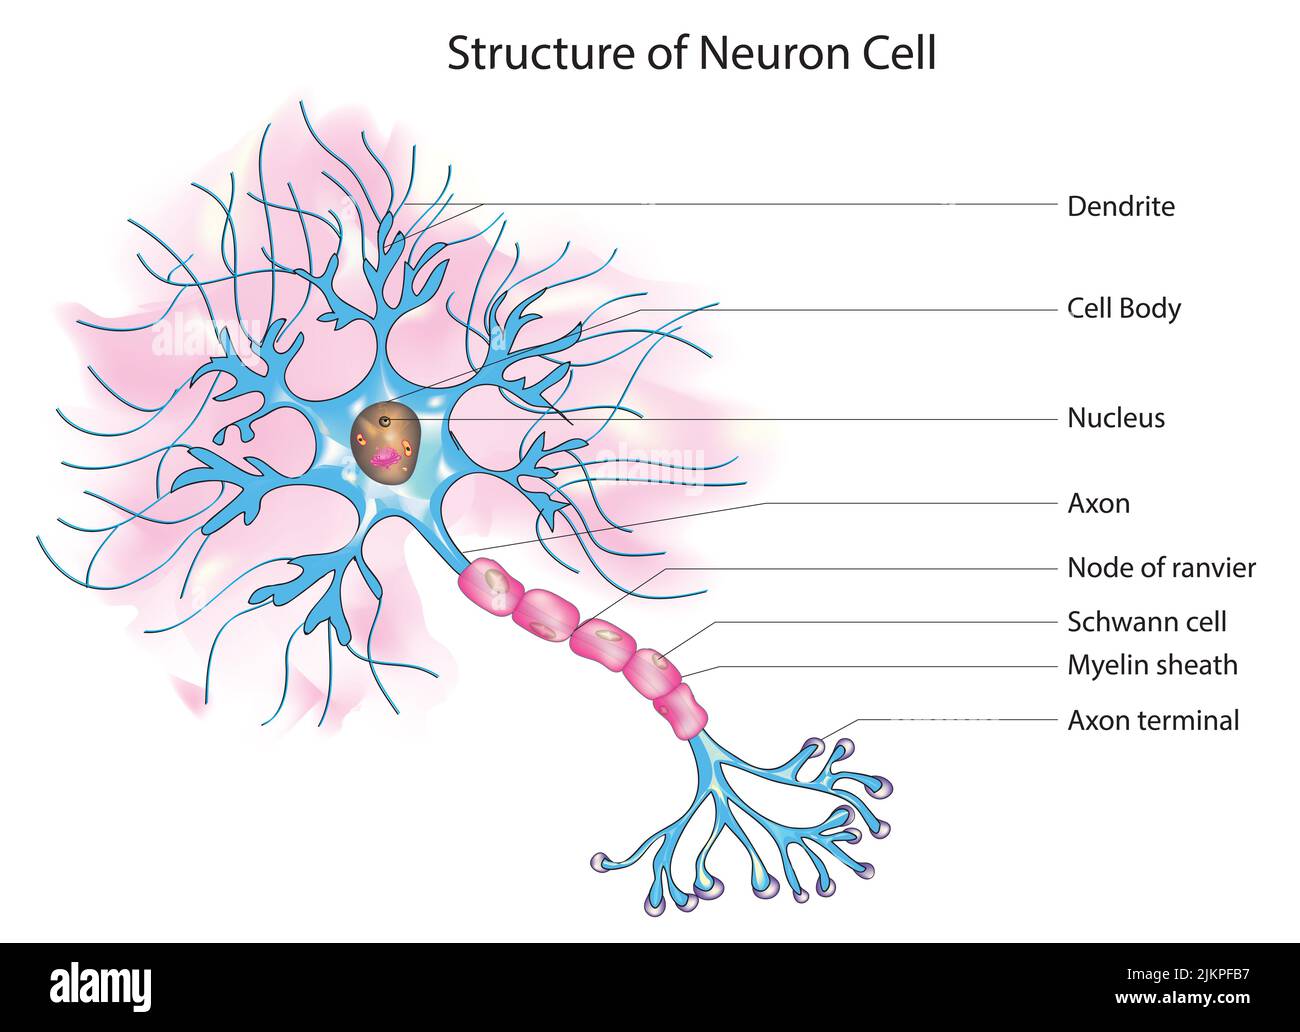 Structure of neuron cell Stock Photo